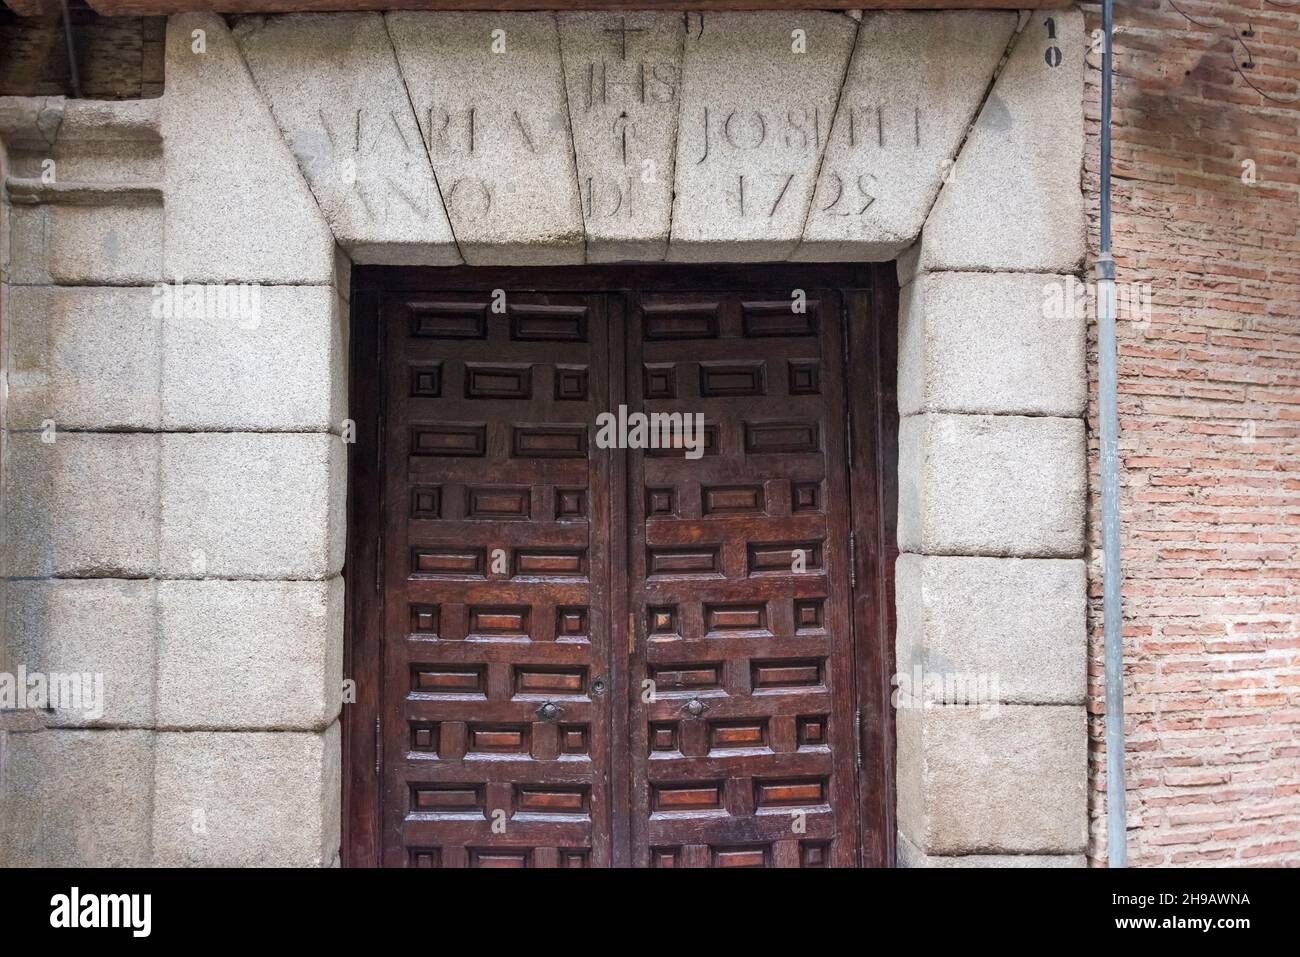 Front door of Casa Botin, founded in 1725 , the oldest restaurant in the world according to the Guinness Book of Records, Madrid, Spain Stock Photo